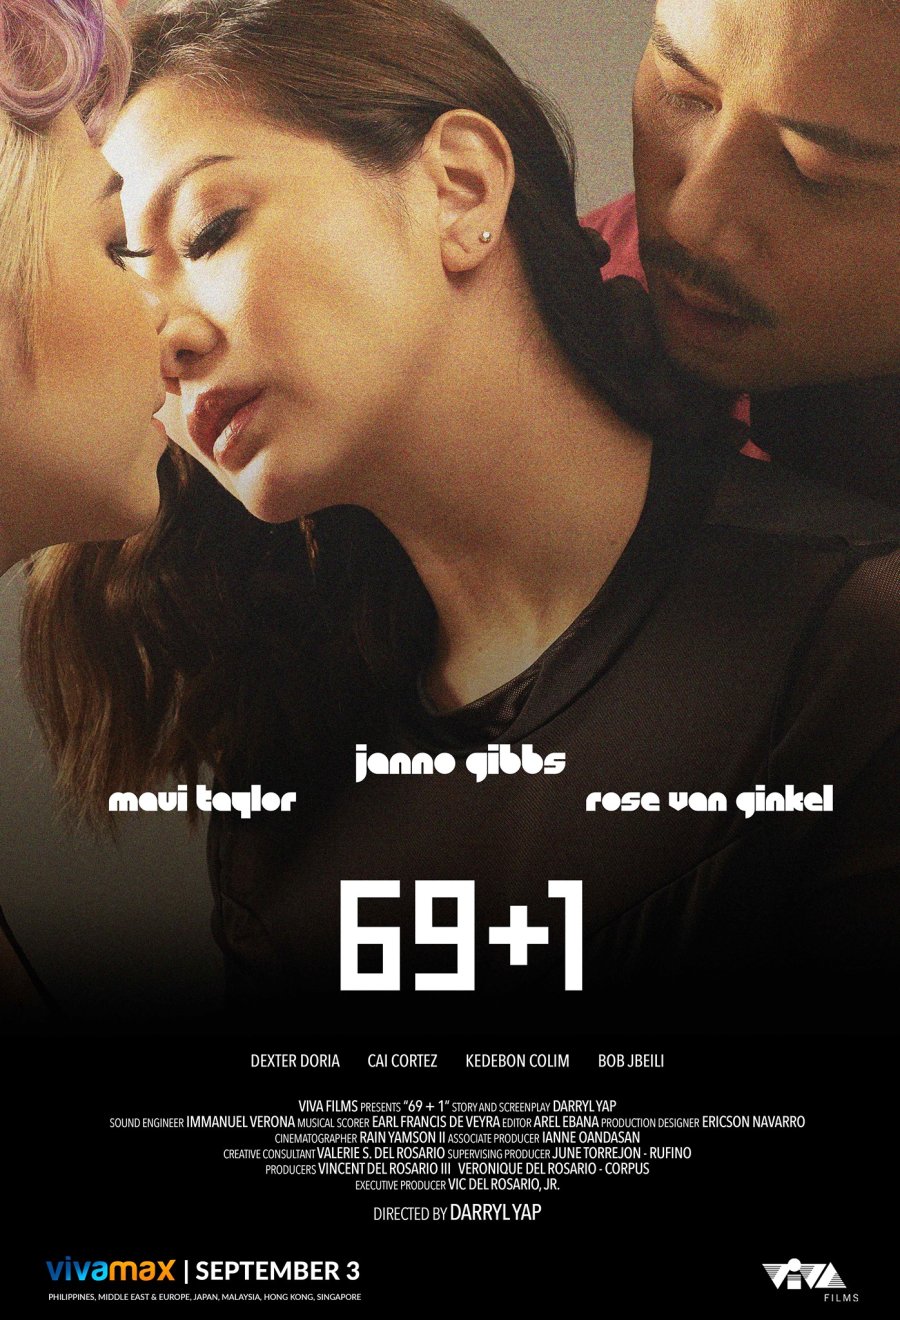 image poster from imdb - ​69+1 (2021)